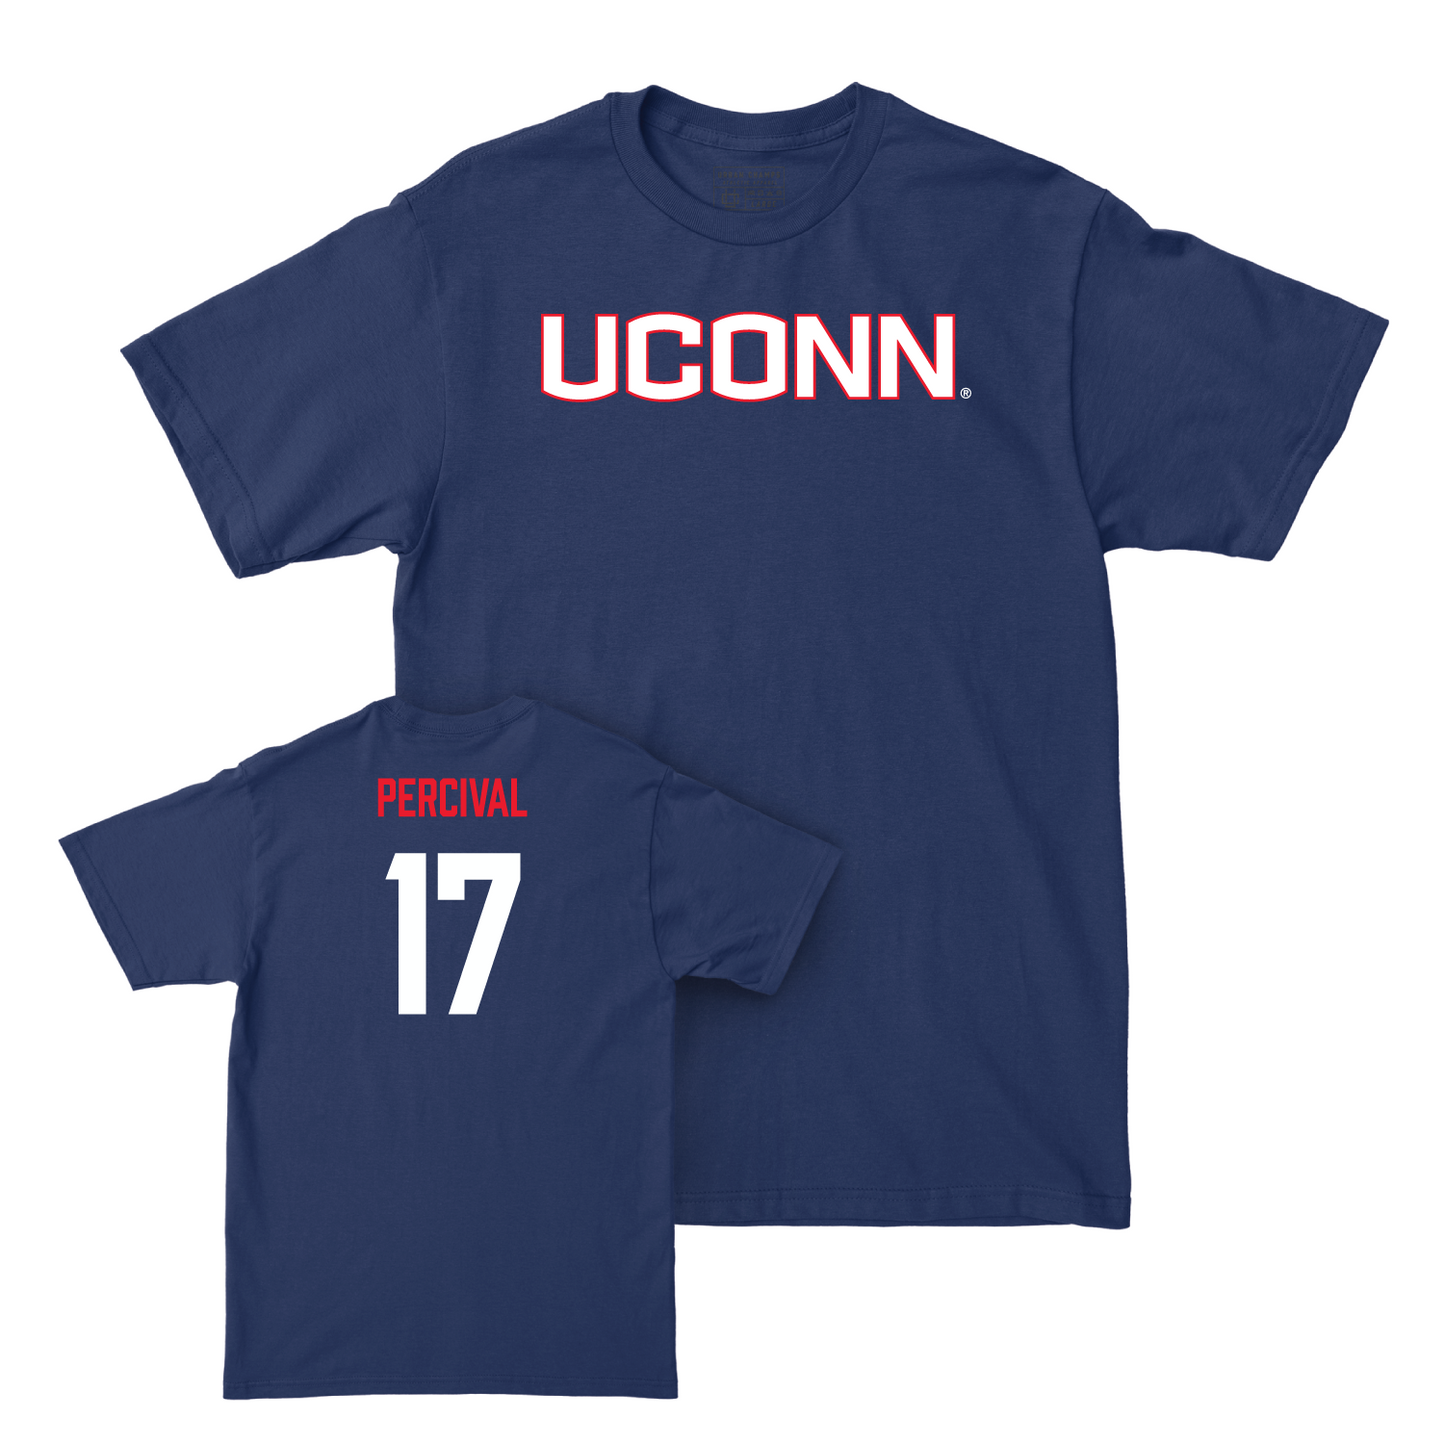 Navy Women's Volleyball UConn Tee Small / Jessica Perry | #11